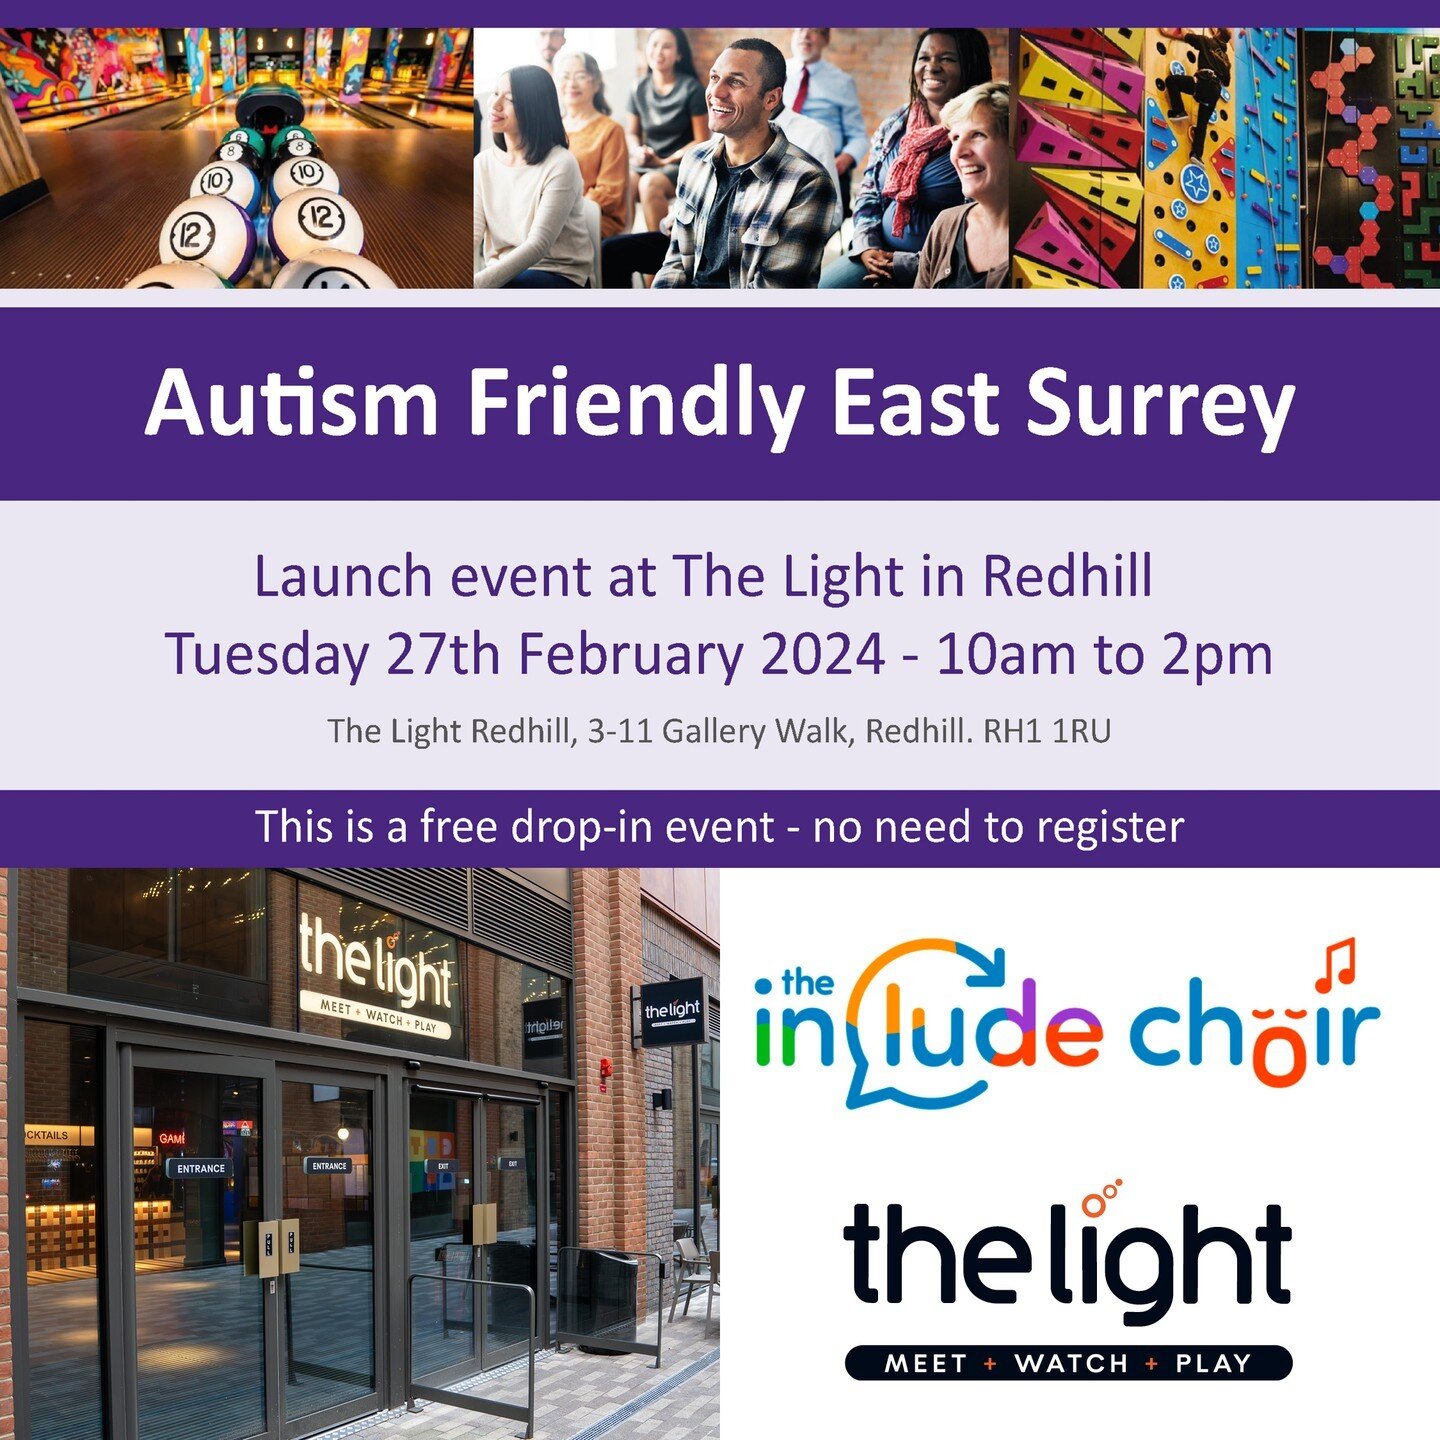 Autism Friendly East Surrey are holding a free event on 27th February 2024 from 10am till 2pm. Held at The Light Redhill, it will include a mixture of training, stalls, information and taster activity sessions!

#Redhill #Autism #TheLight #Cinema #Bo